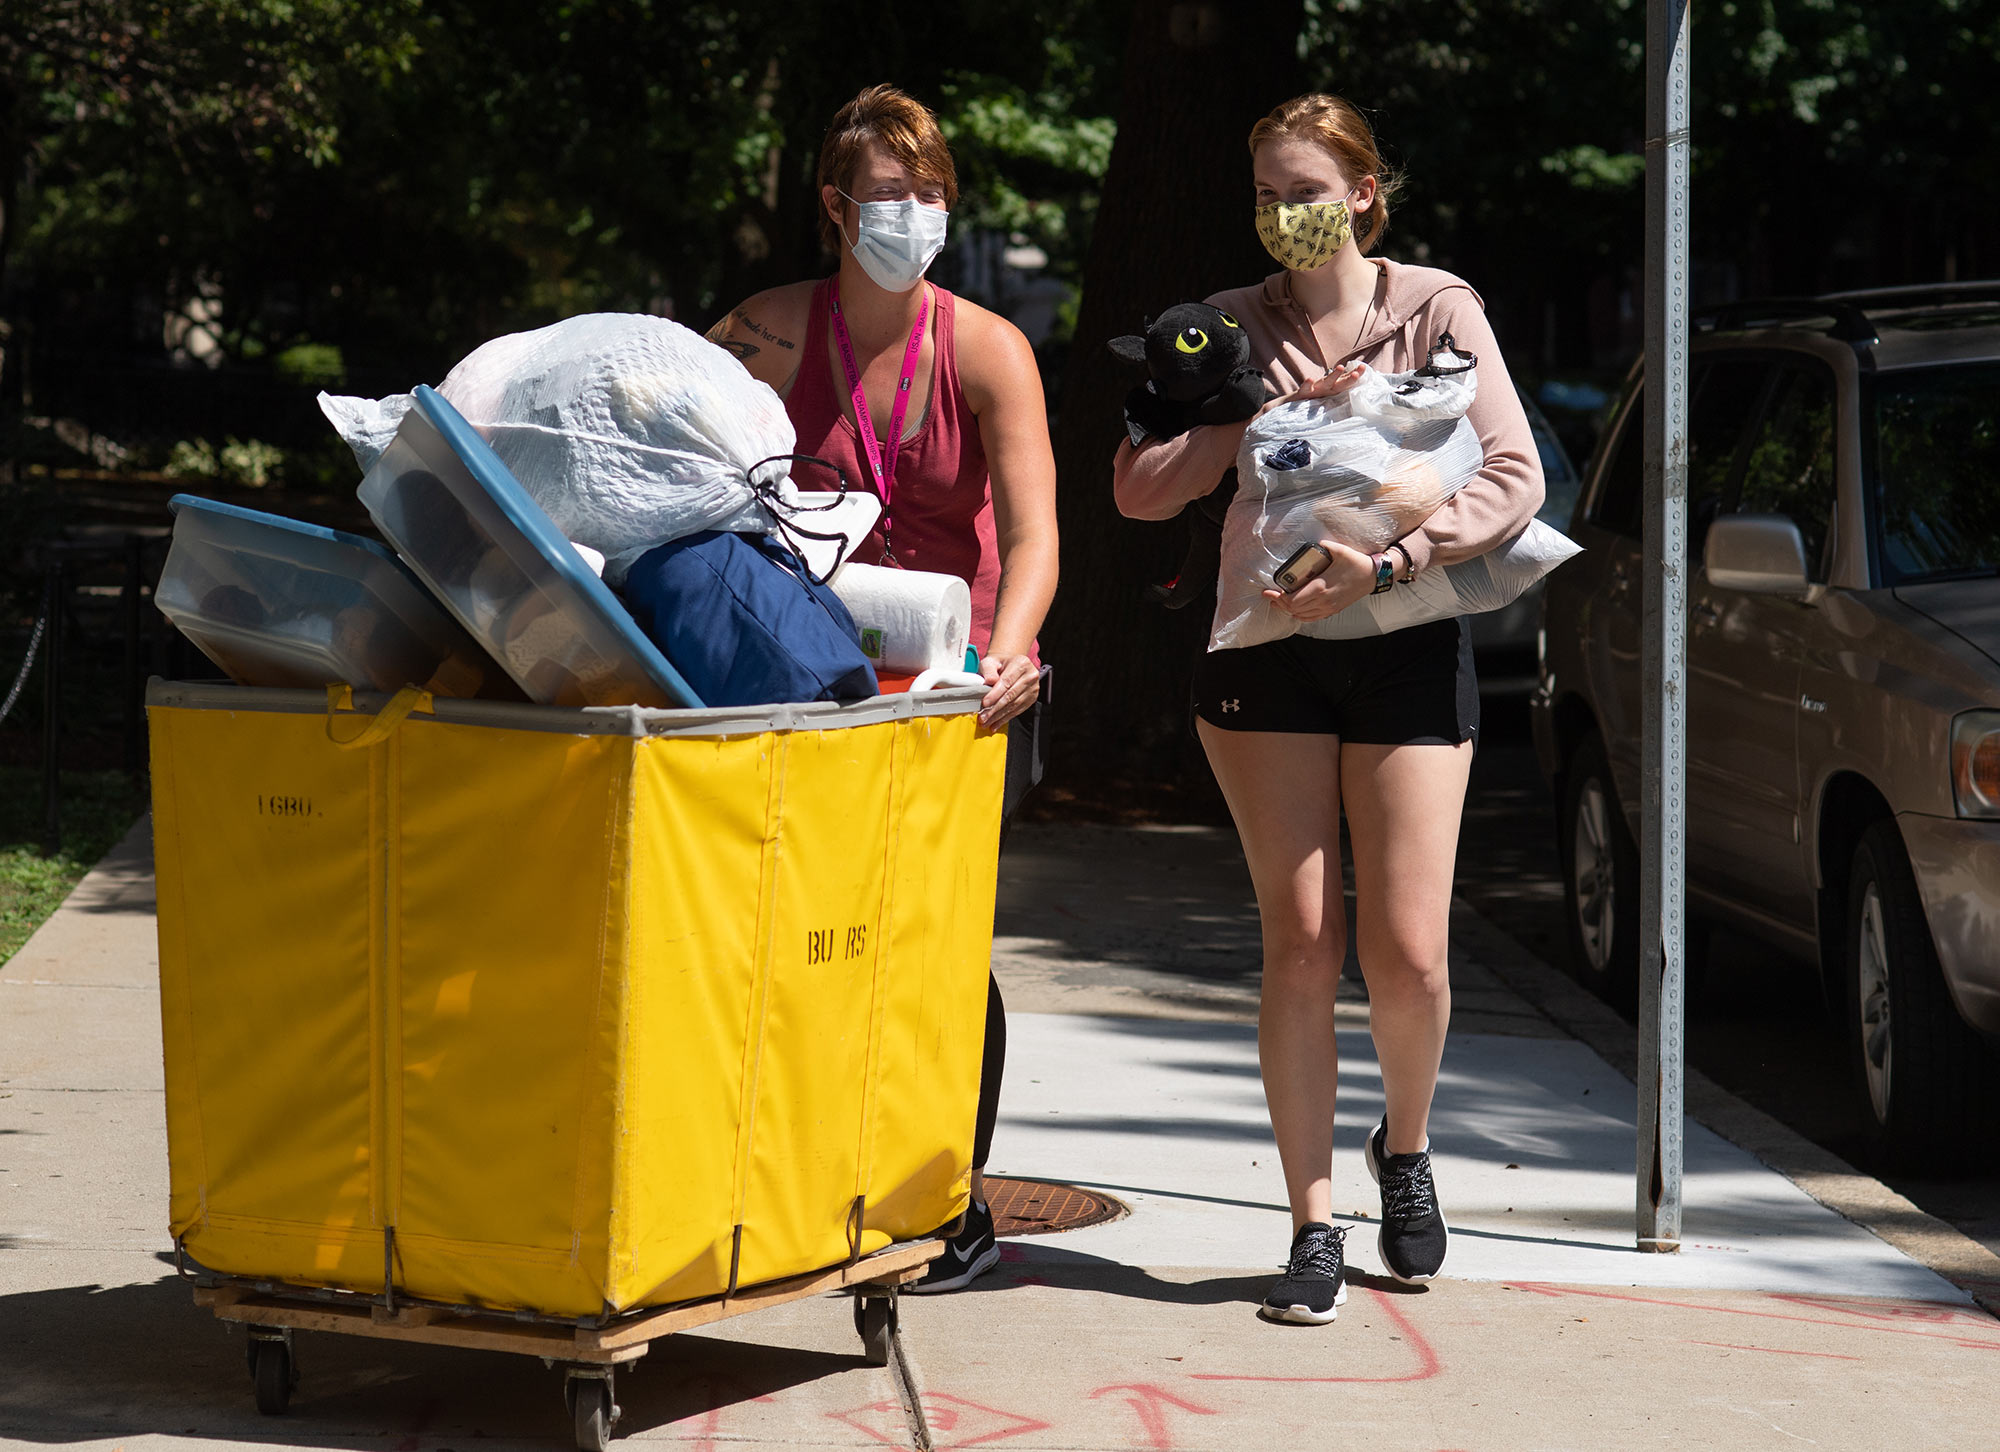 Elina Brooks (ENG’24), right, moves into Kilachand Hall with the help of her mom M.J. Brooks August 17. The two traveled from Annapolis. Both women wear masks and M.J. Brooks pushes a yellow cart of belongings while Brooks carries something.